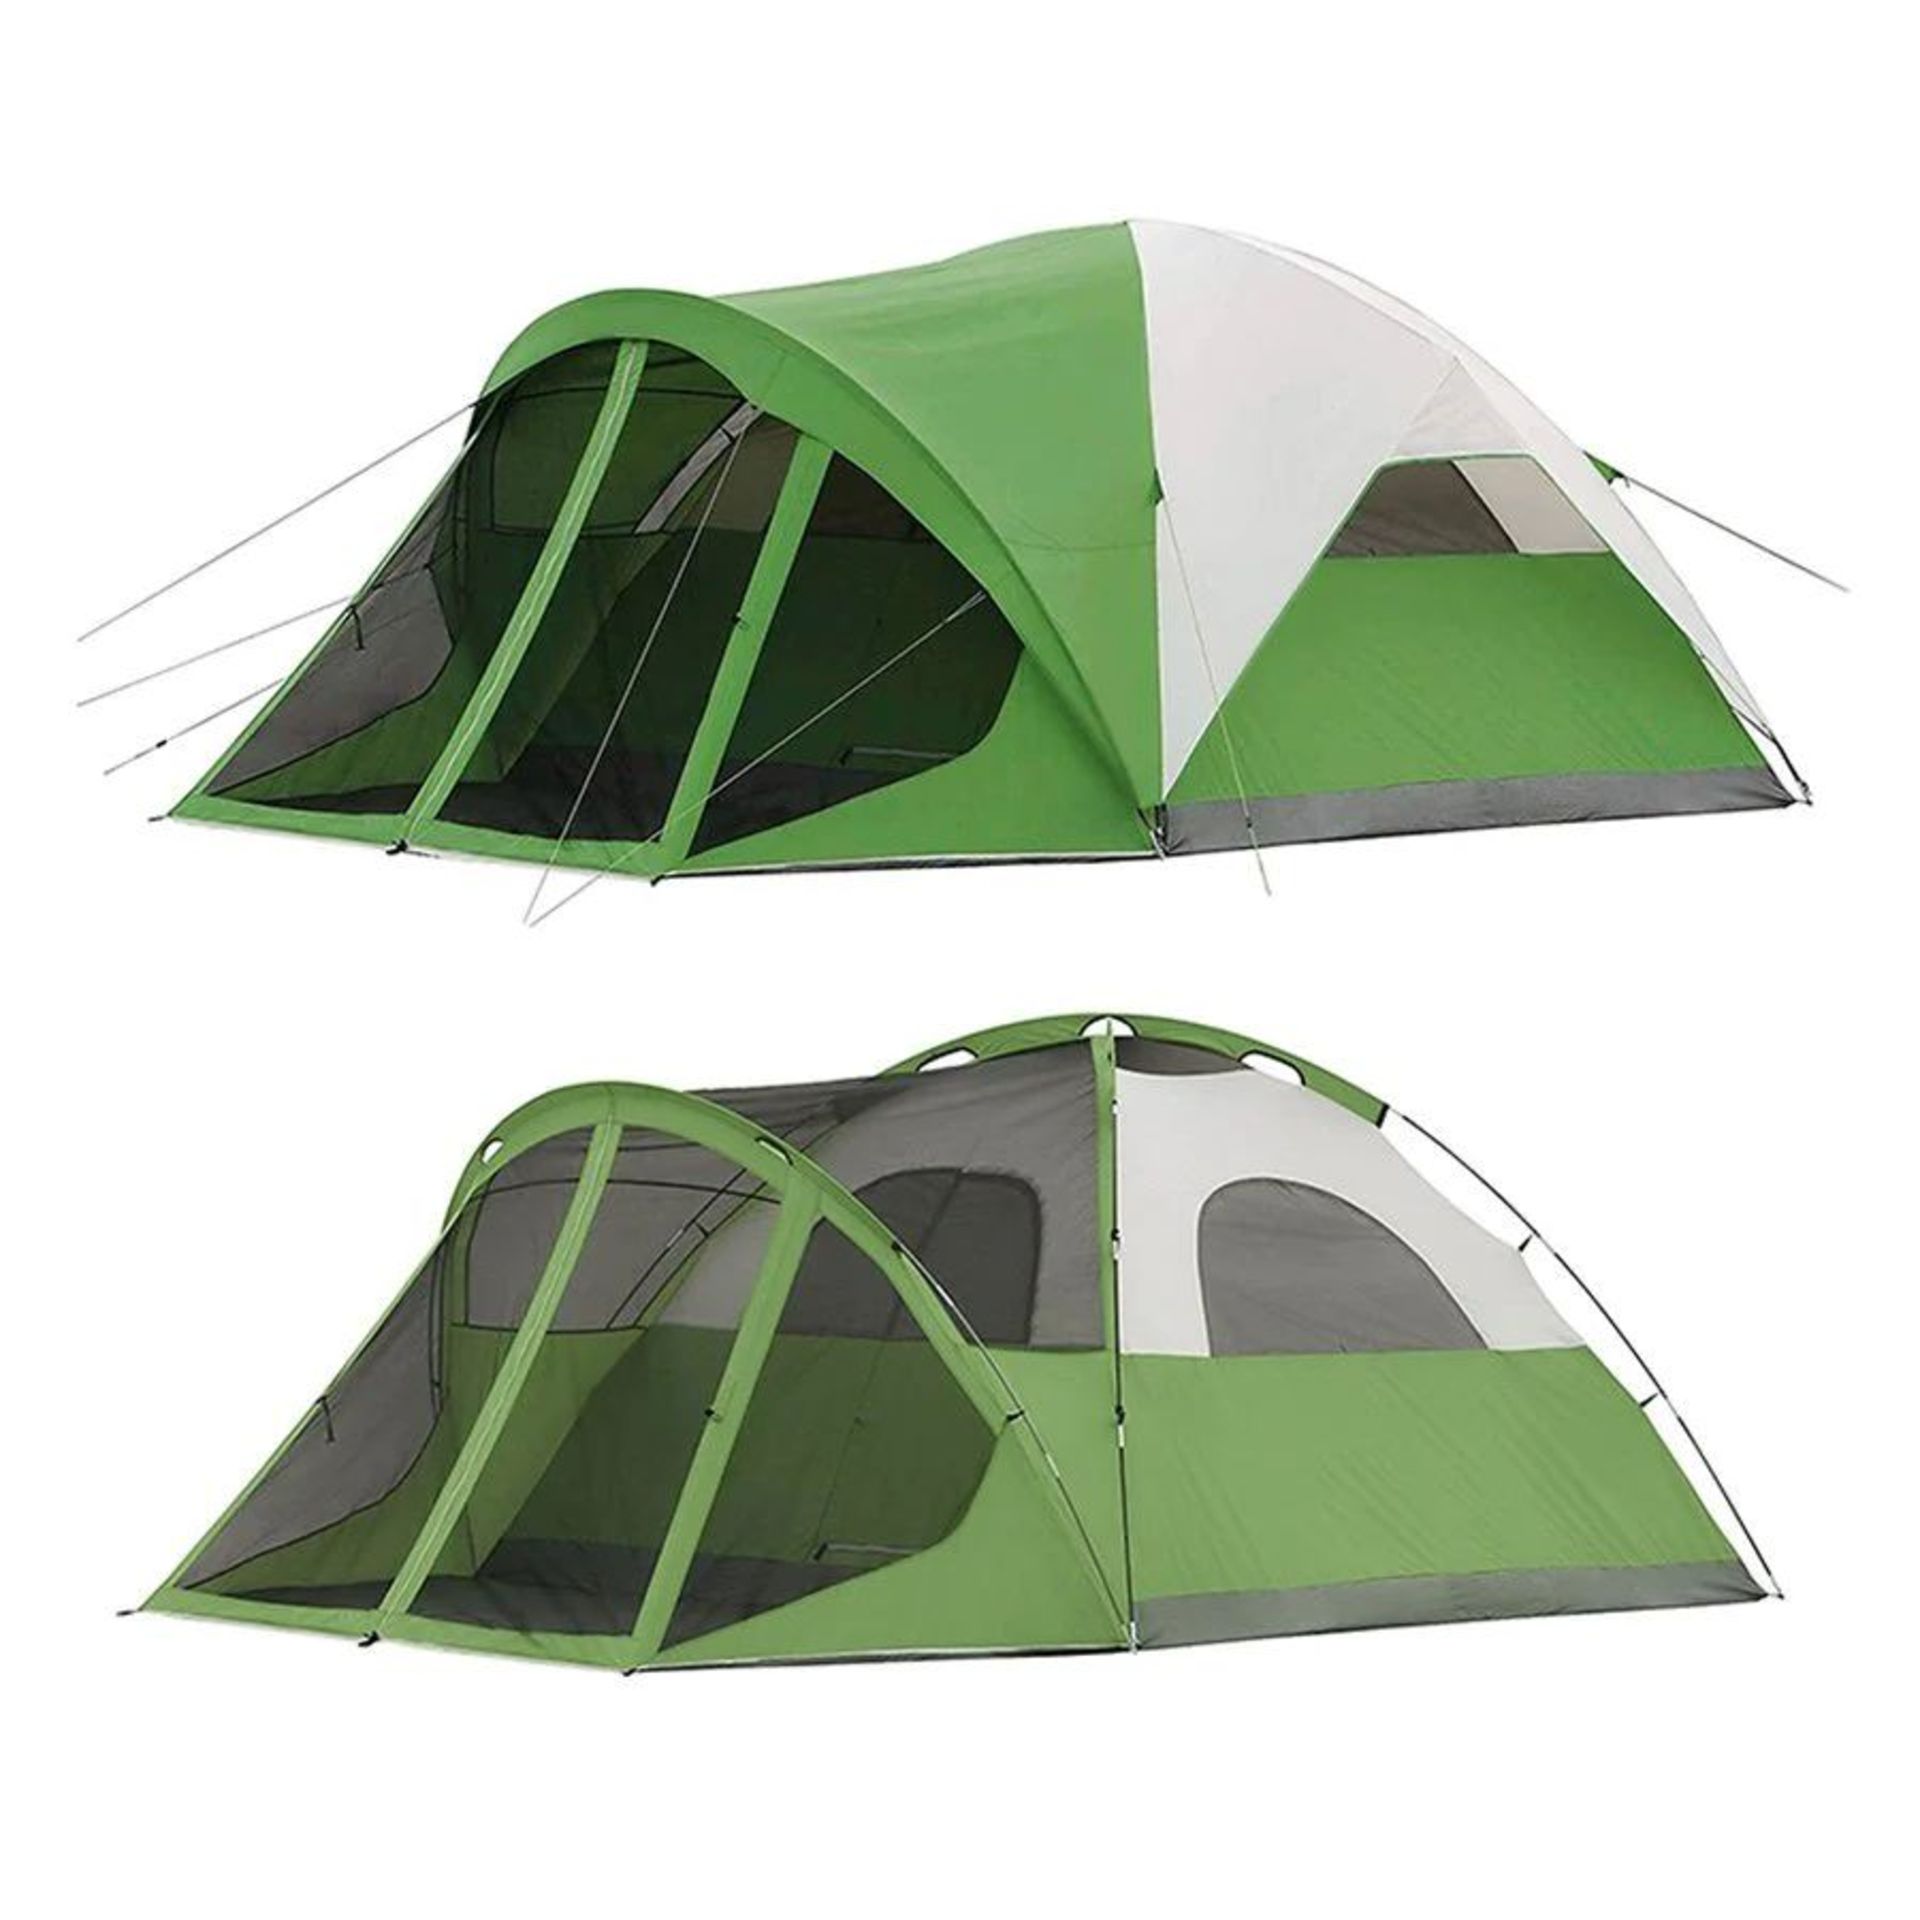 RBSM SPORTS 6-PERSON DOME CAMPING TENT W/ RAINFLY (NEW) (MSRP $300)